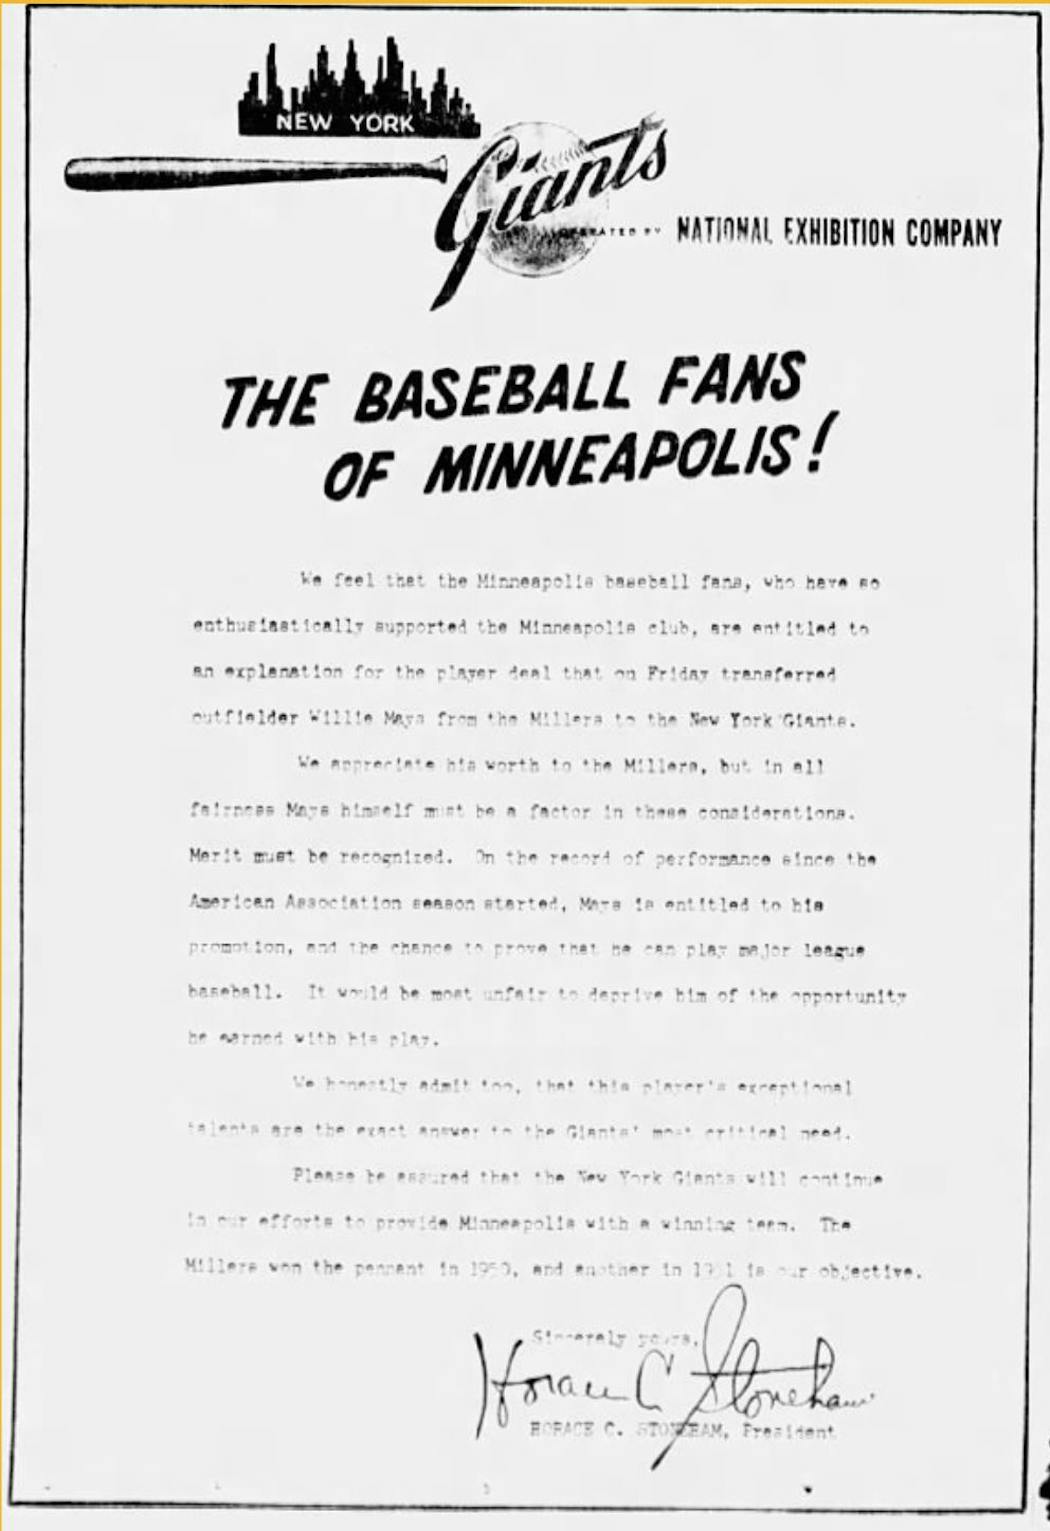 In a letter published May 27, 1951 in the Minneapolis Tribune, New York Giants owner Horace Stoneham wrote Minneapolis Millers fans were 